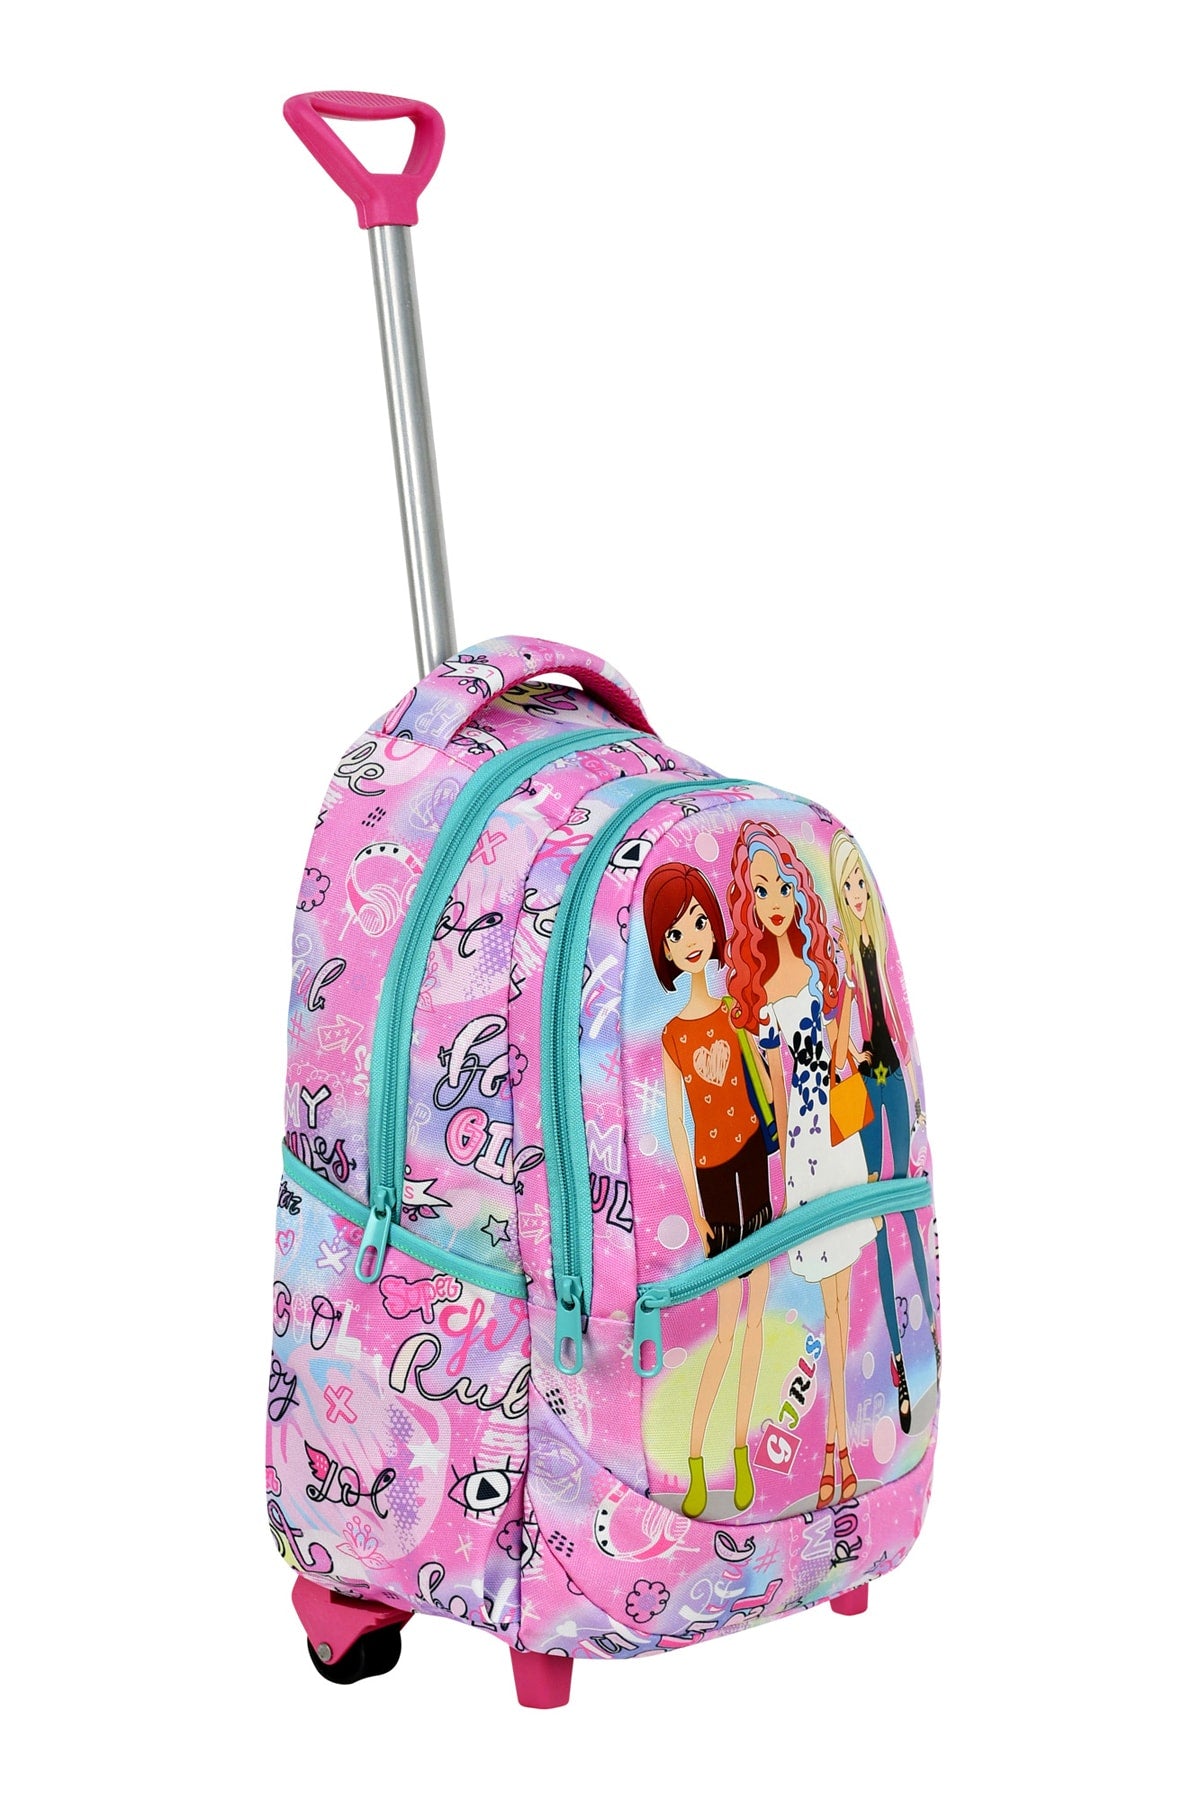 3-pack School Set with Squeegee, Girl Patterned Primary School Bag + Lunch Box + Pencil Holder